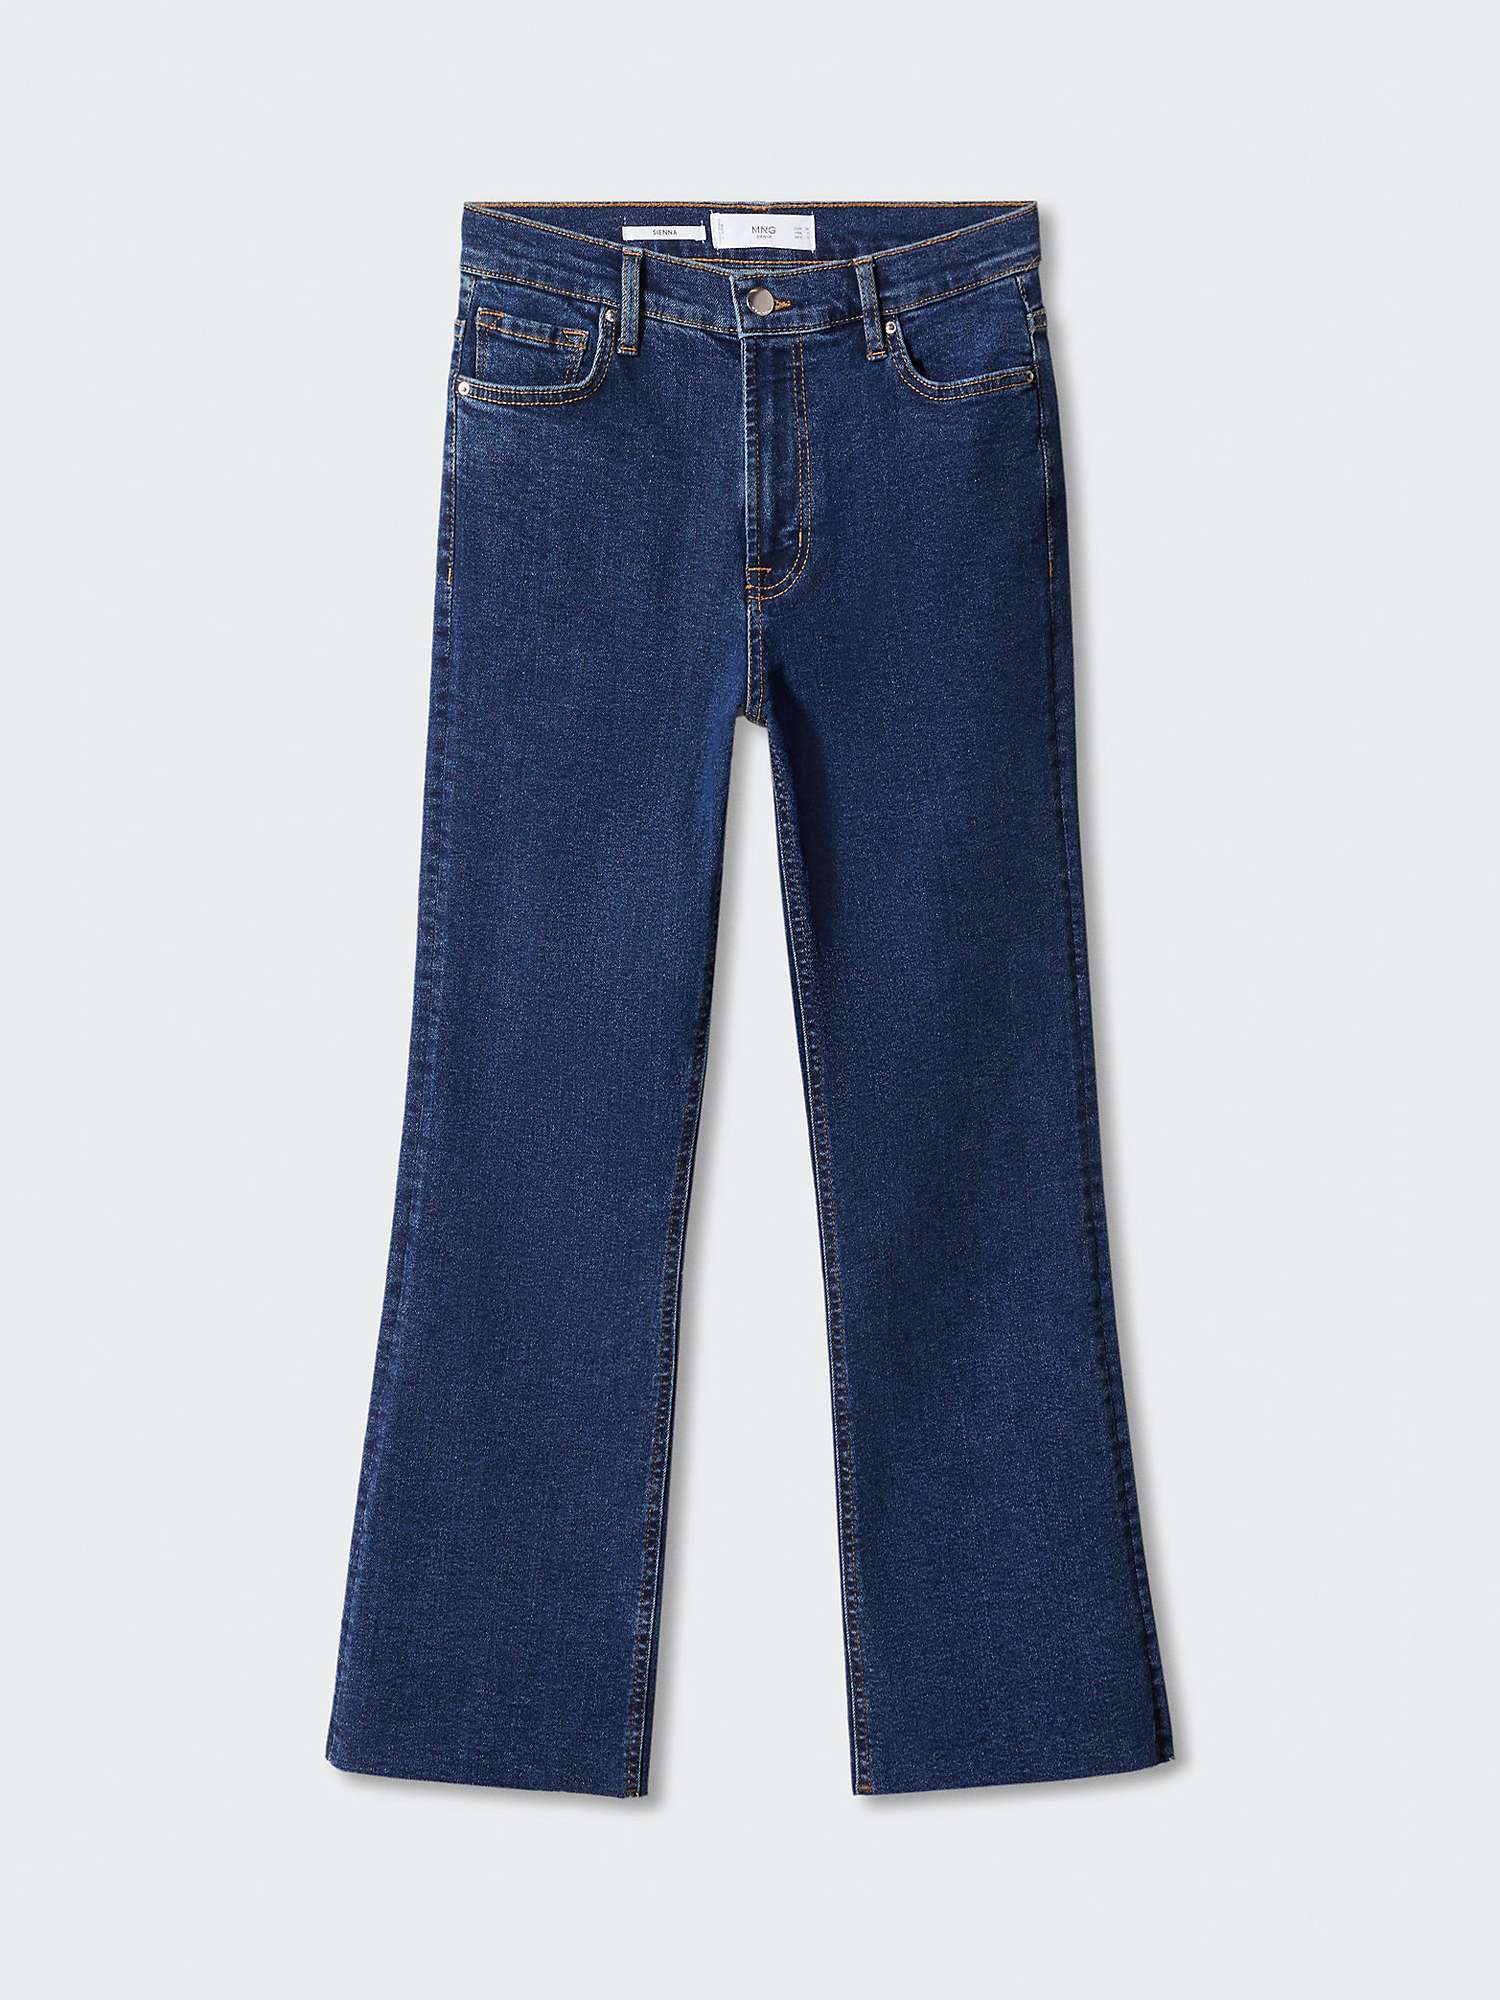 Buy Mango Sienne Cropped Flared Jeans, Open Blue Online at johnlewis.com